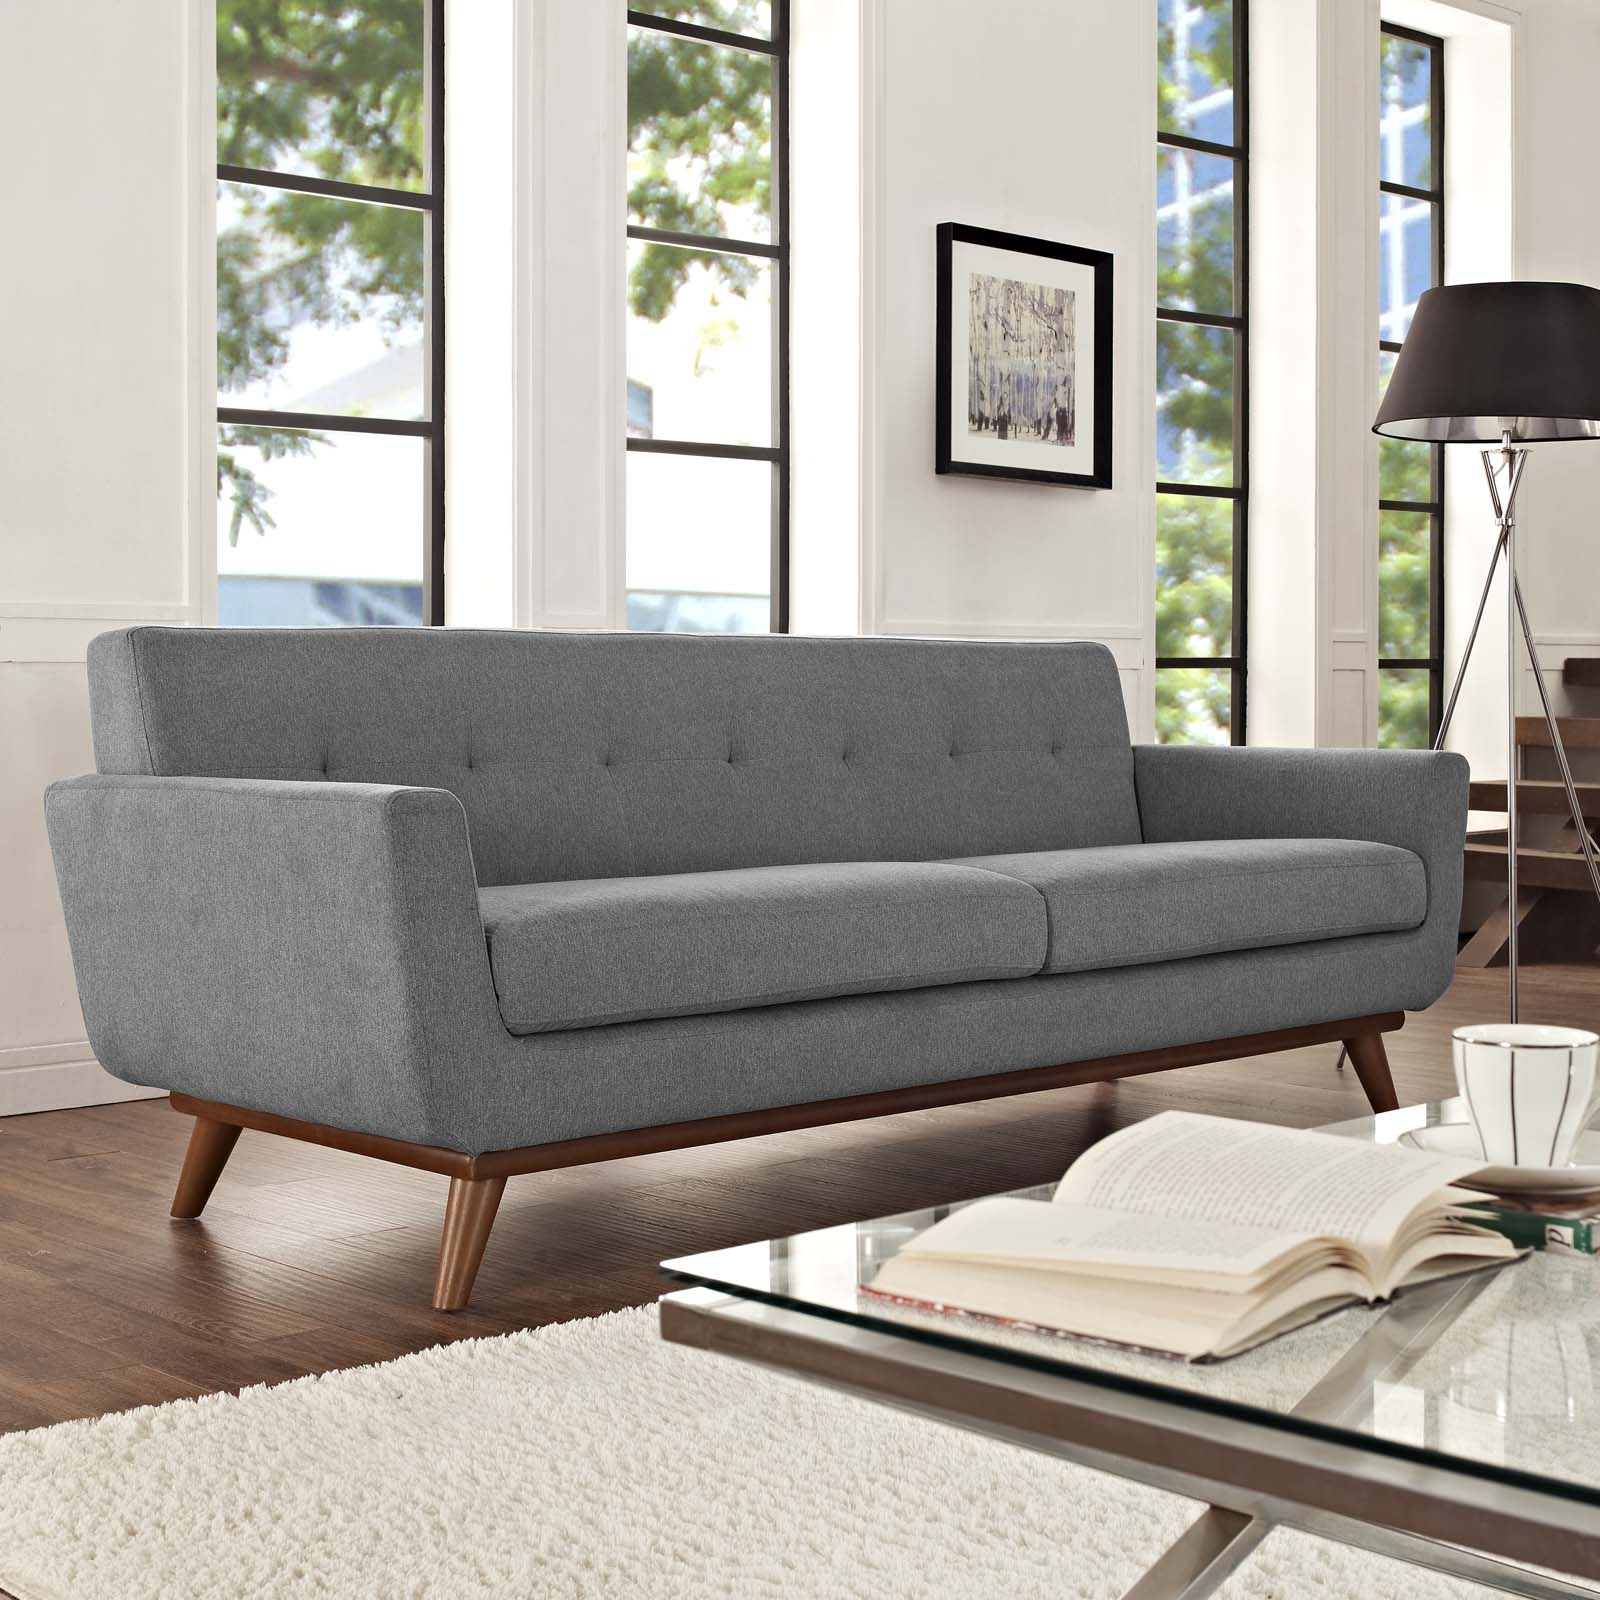 Modway Sofas & Couches - Engage Upholstered Fabric Sofa Expectation Gray